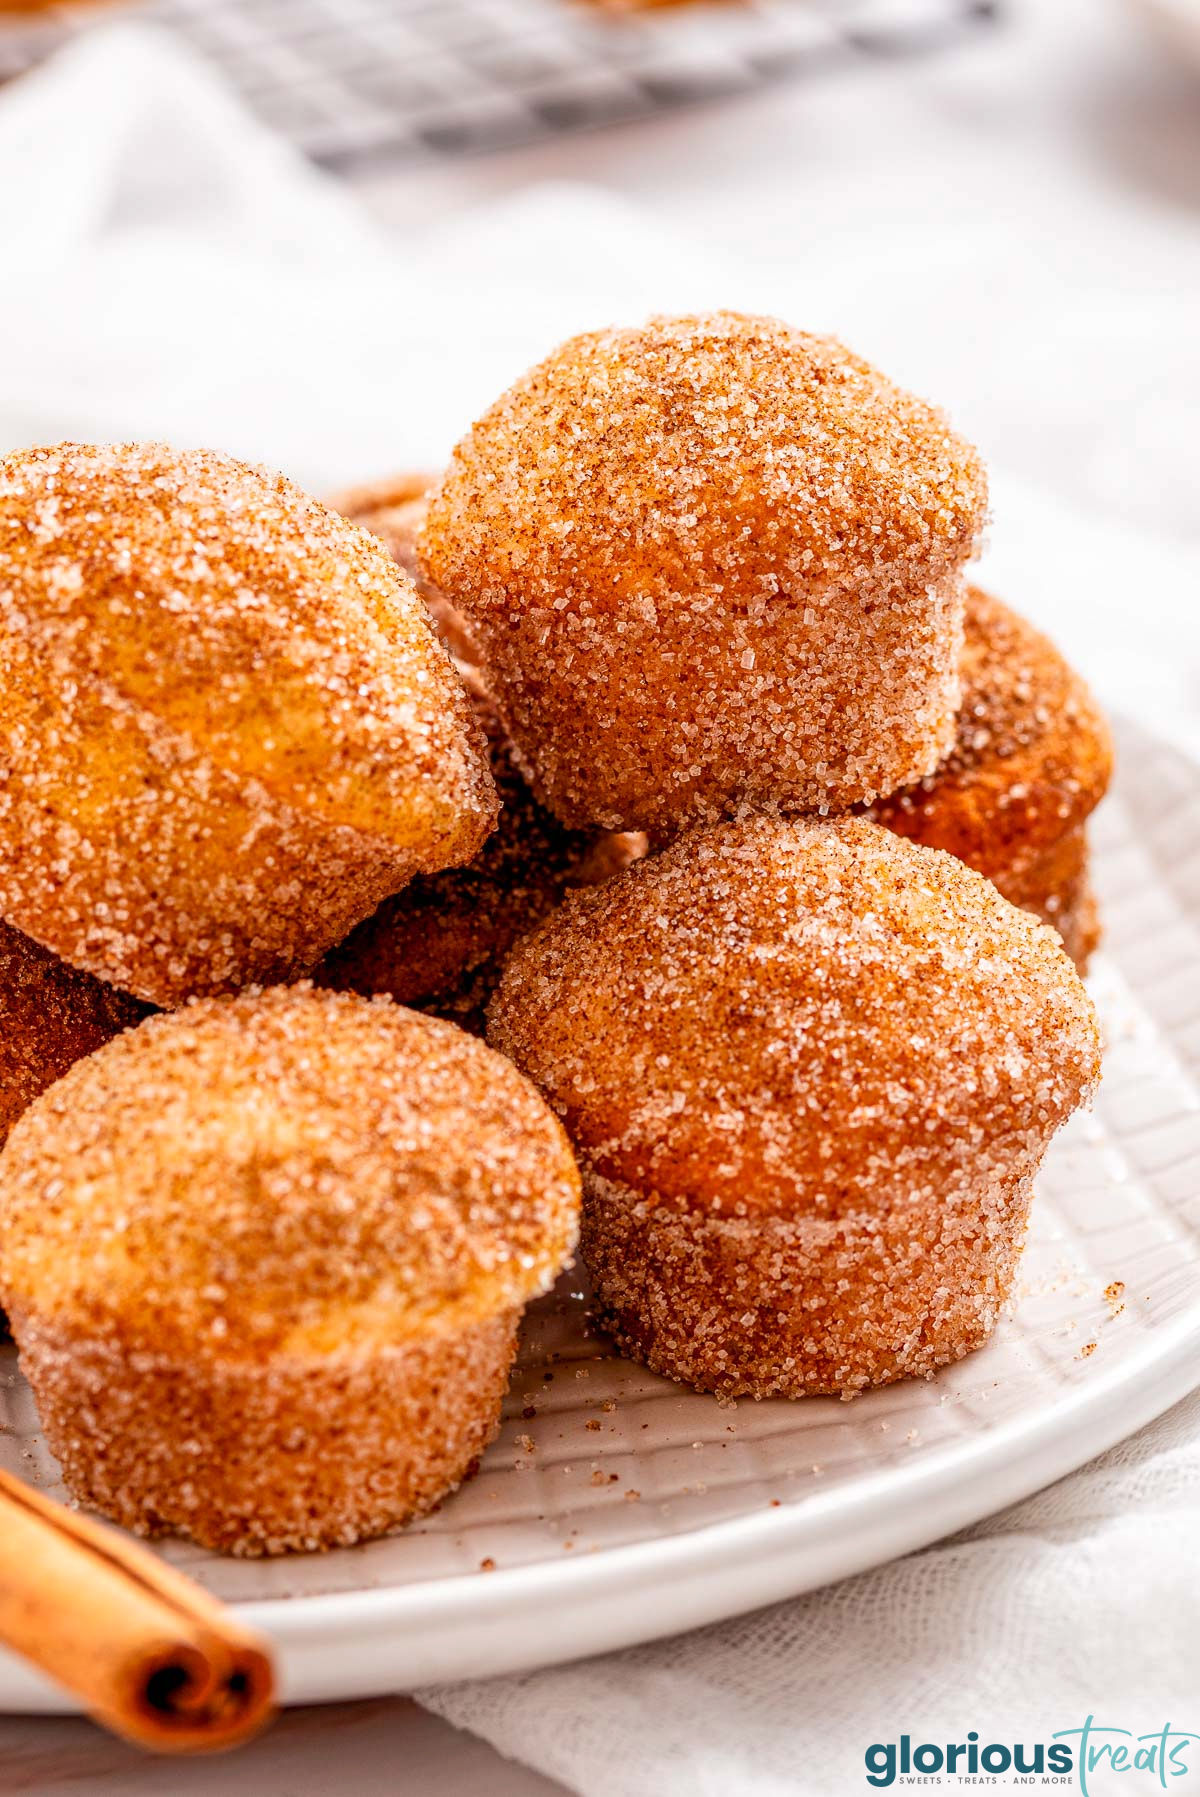 white plate full of cinnamon sugar donut muffins in a pile with a cinnamon stick on the plate.